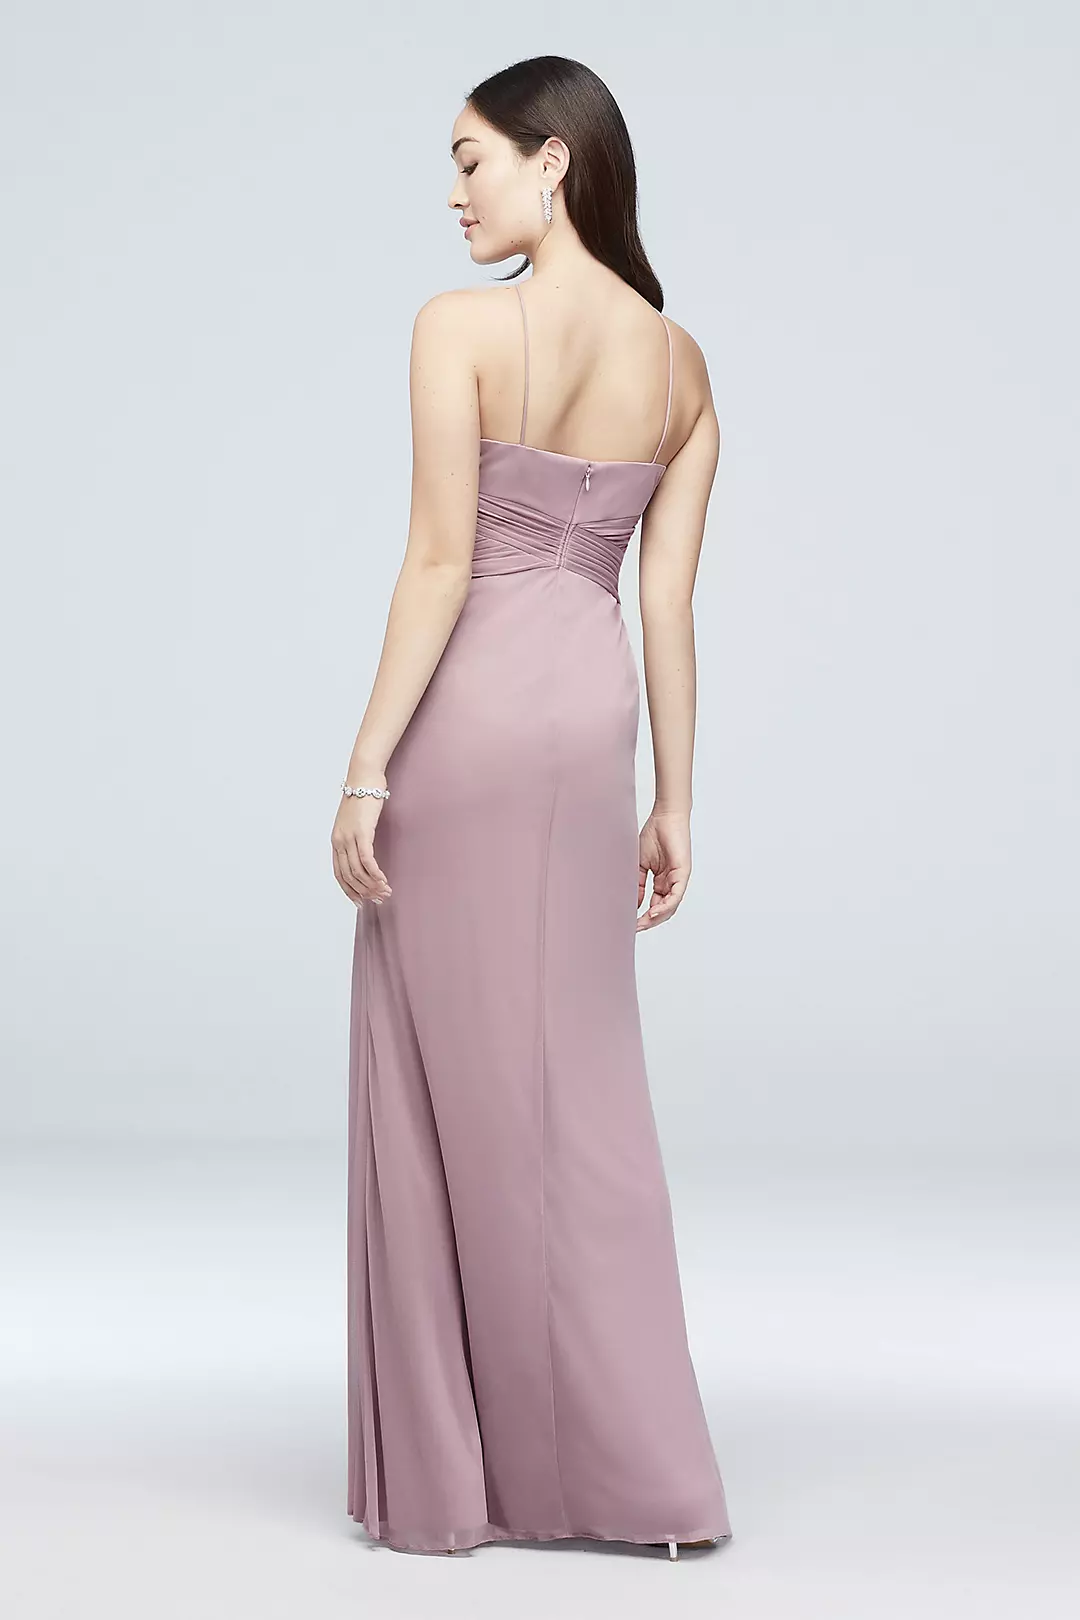 Y-Neck Mesh Bridesmaid Dress with Pleated Waist Image 2